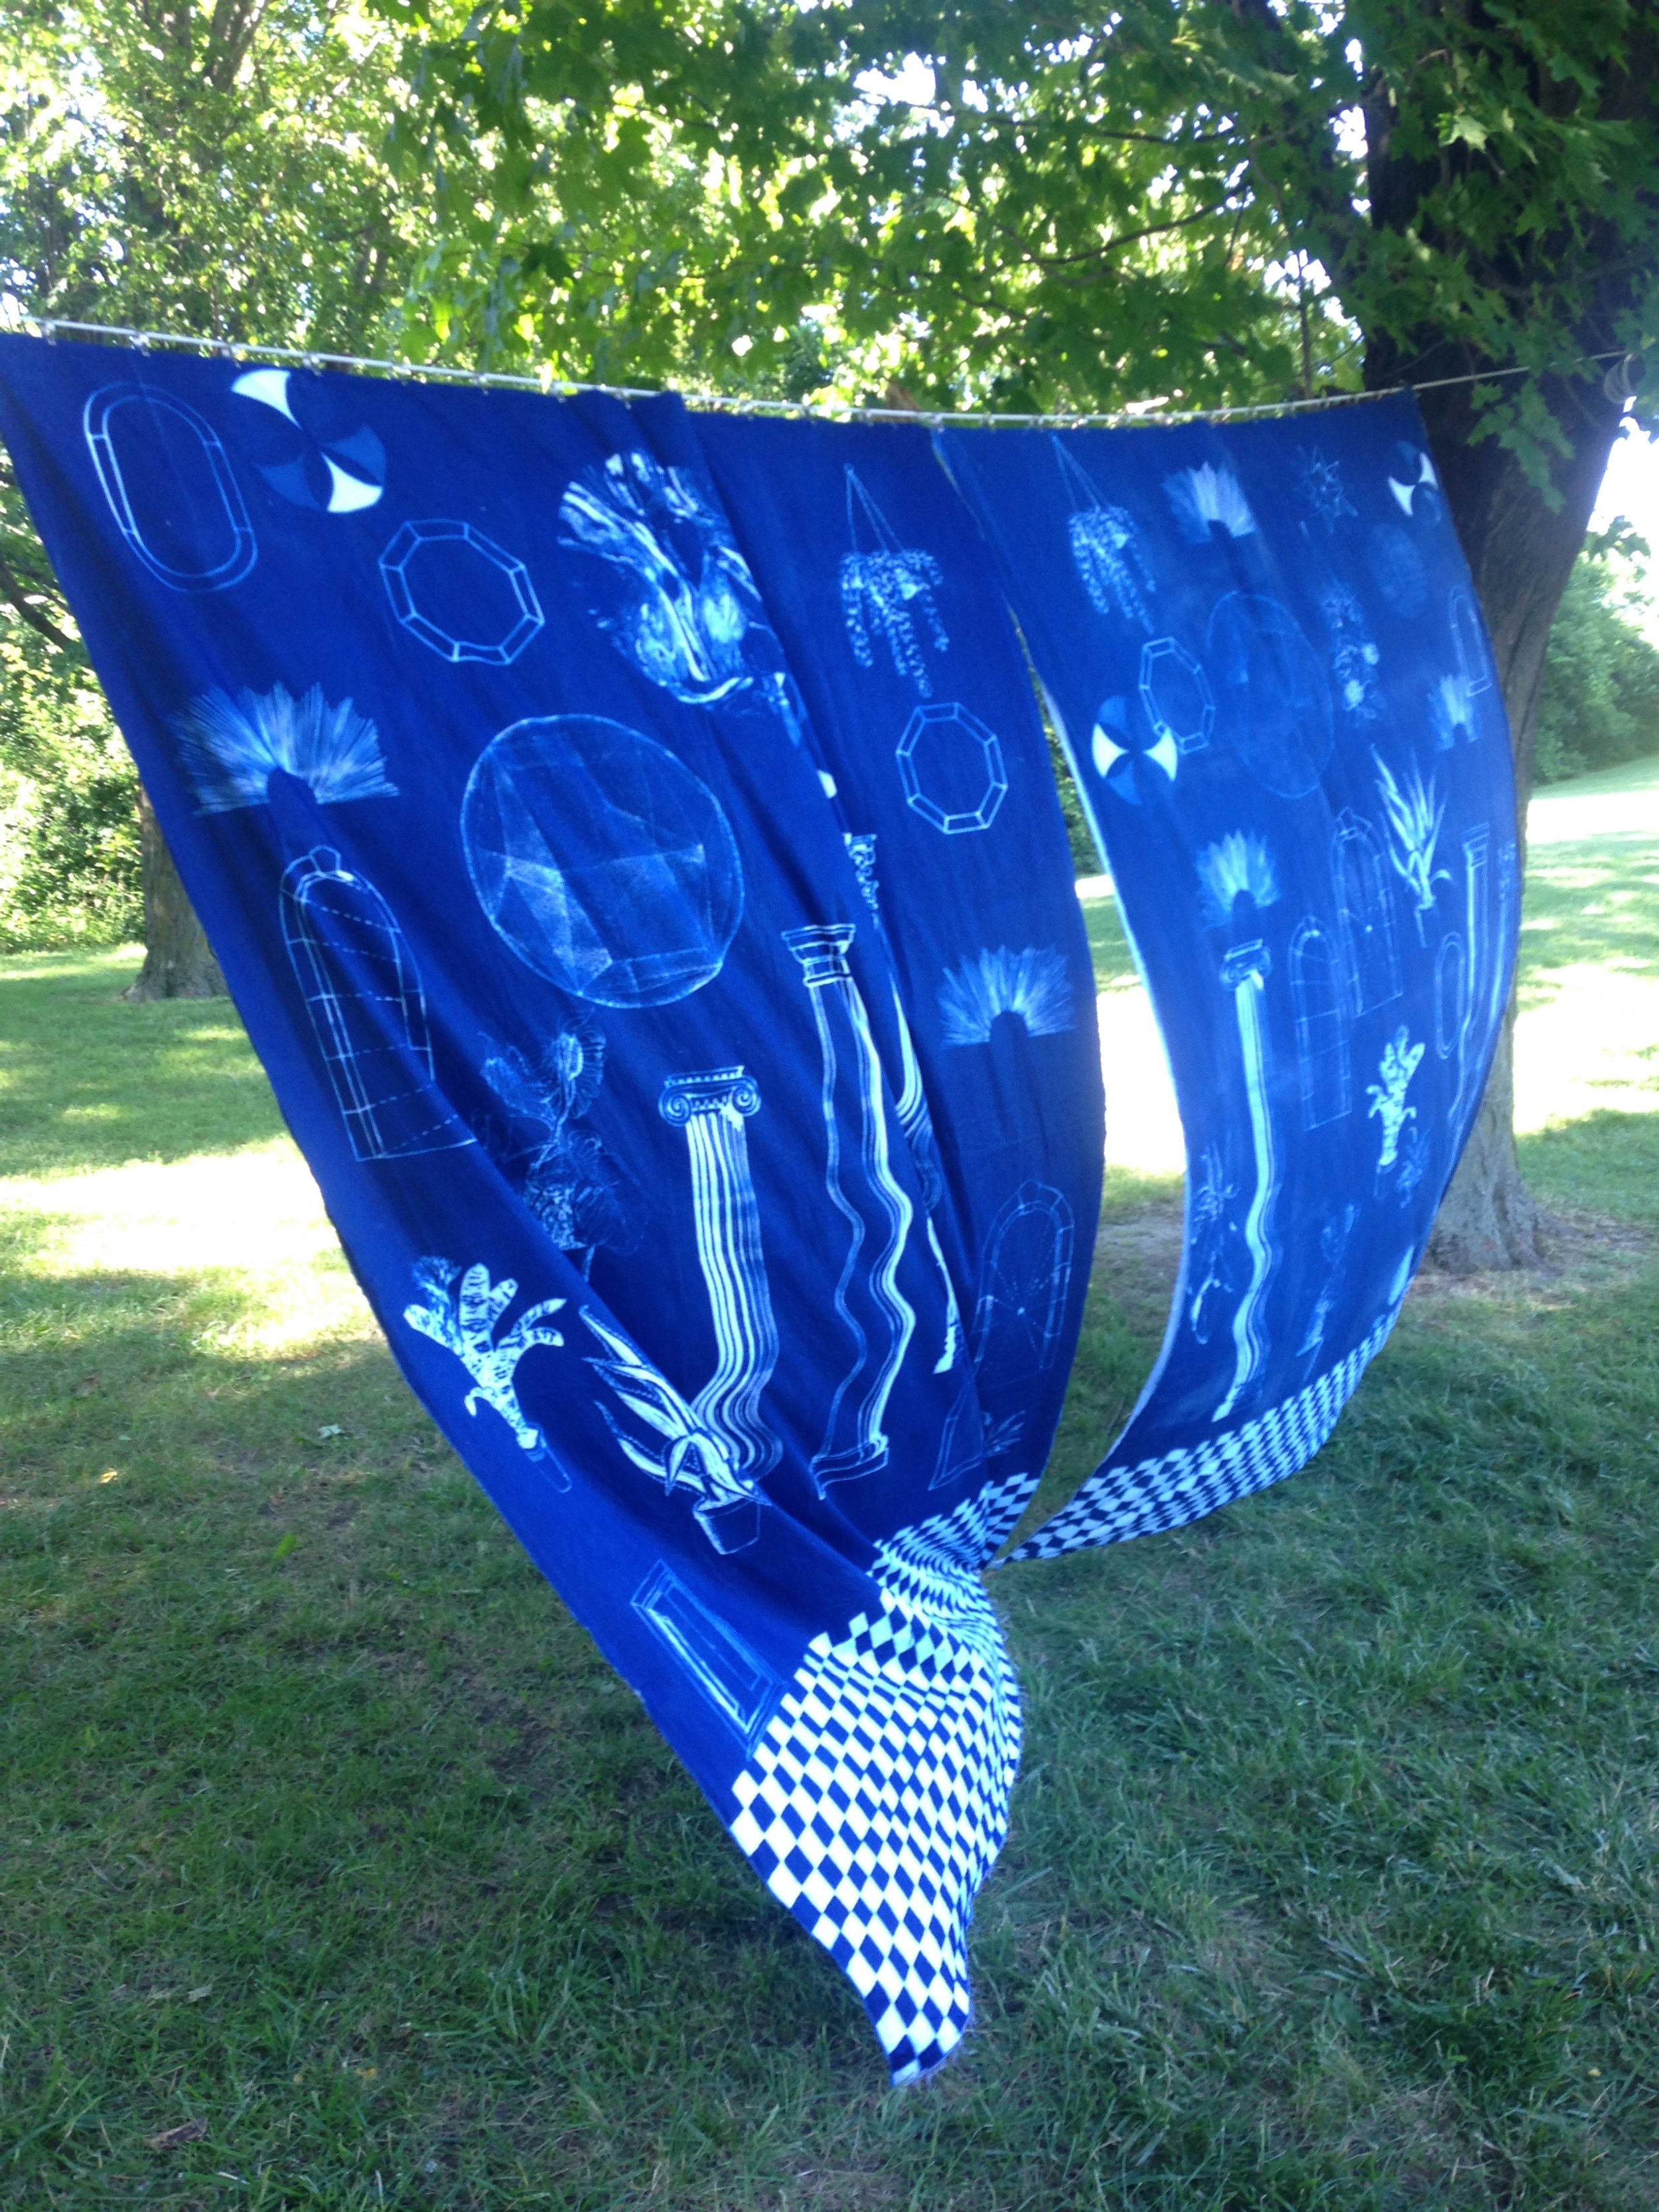  a place halfway between both worlds where anything can happen and there is no problem with time  Cyanotype sun printed curtains, each 5' x 7'  Feast in the East, Praire Drive park, Scarborough&nbsp;  2017 